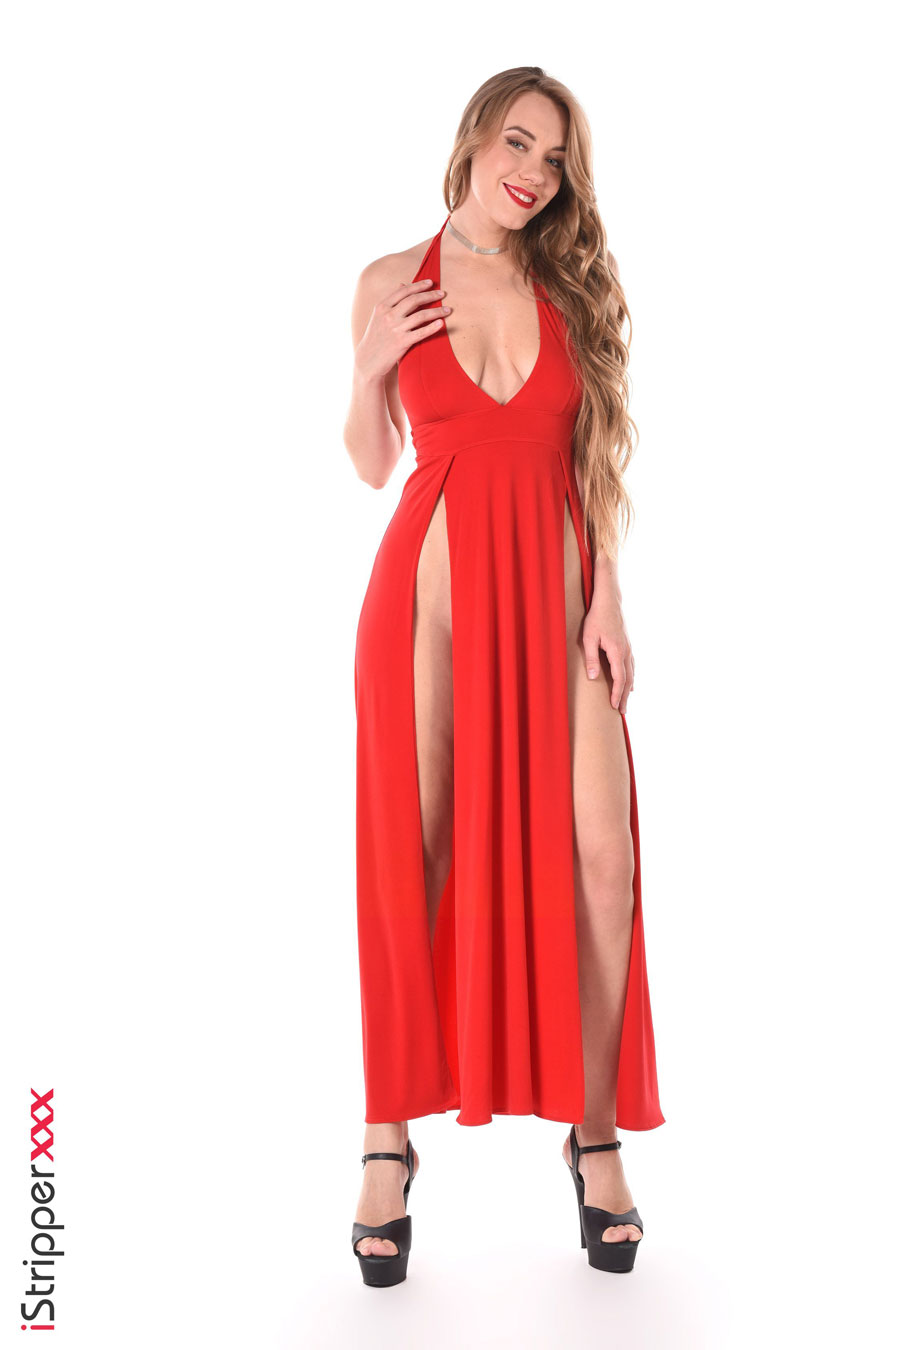 Ryana in a Sexy Red Dress